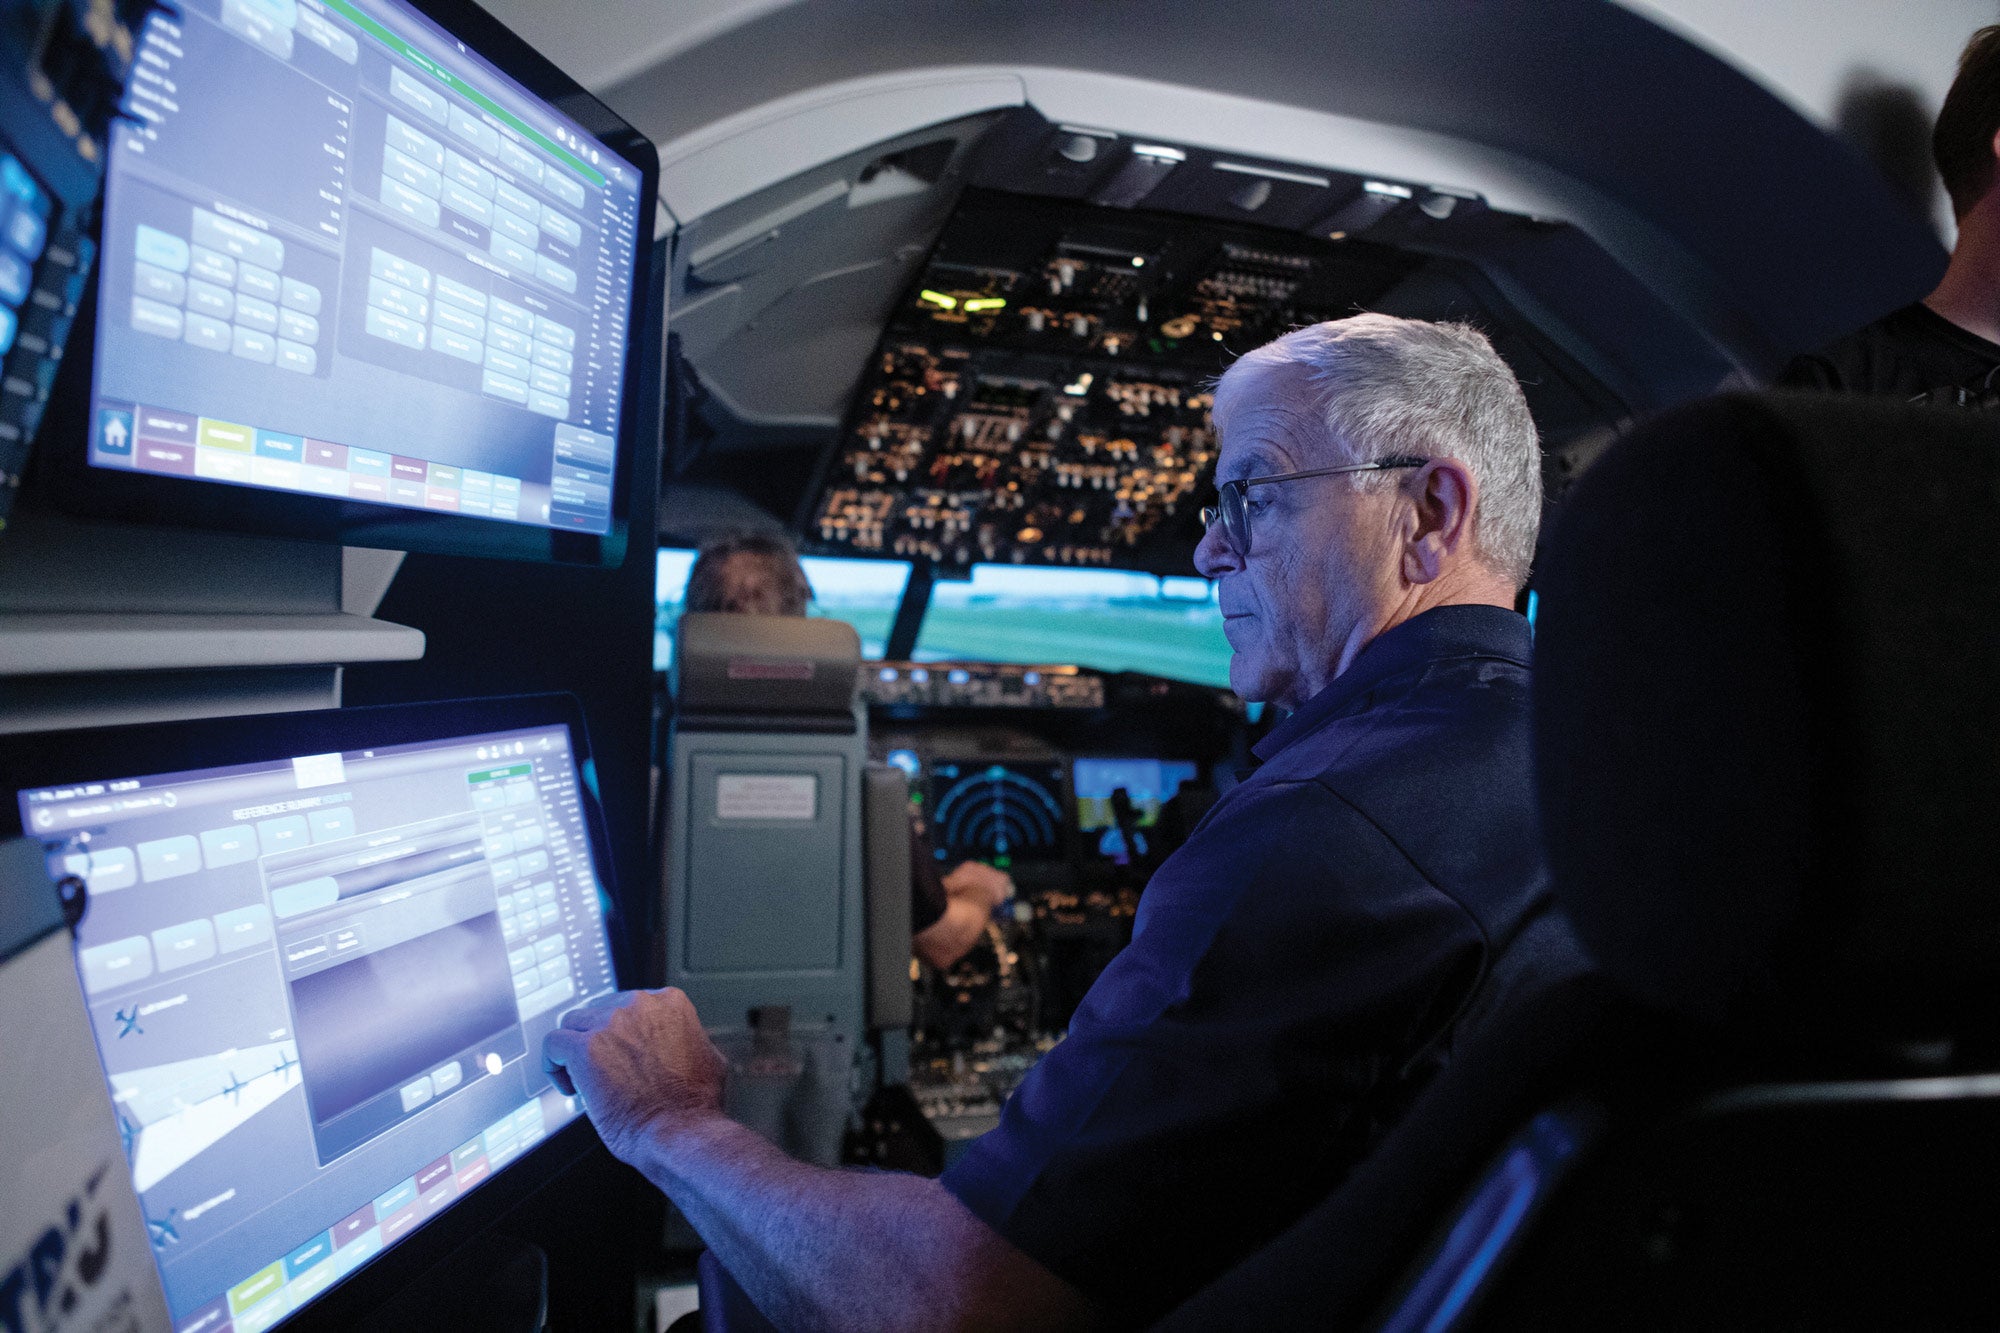 FlightSafety instructor at a simulator station during training